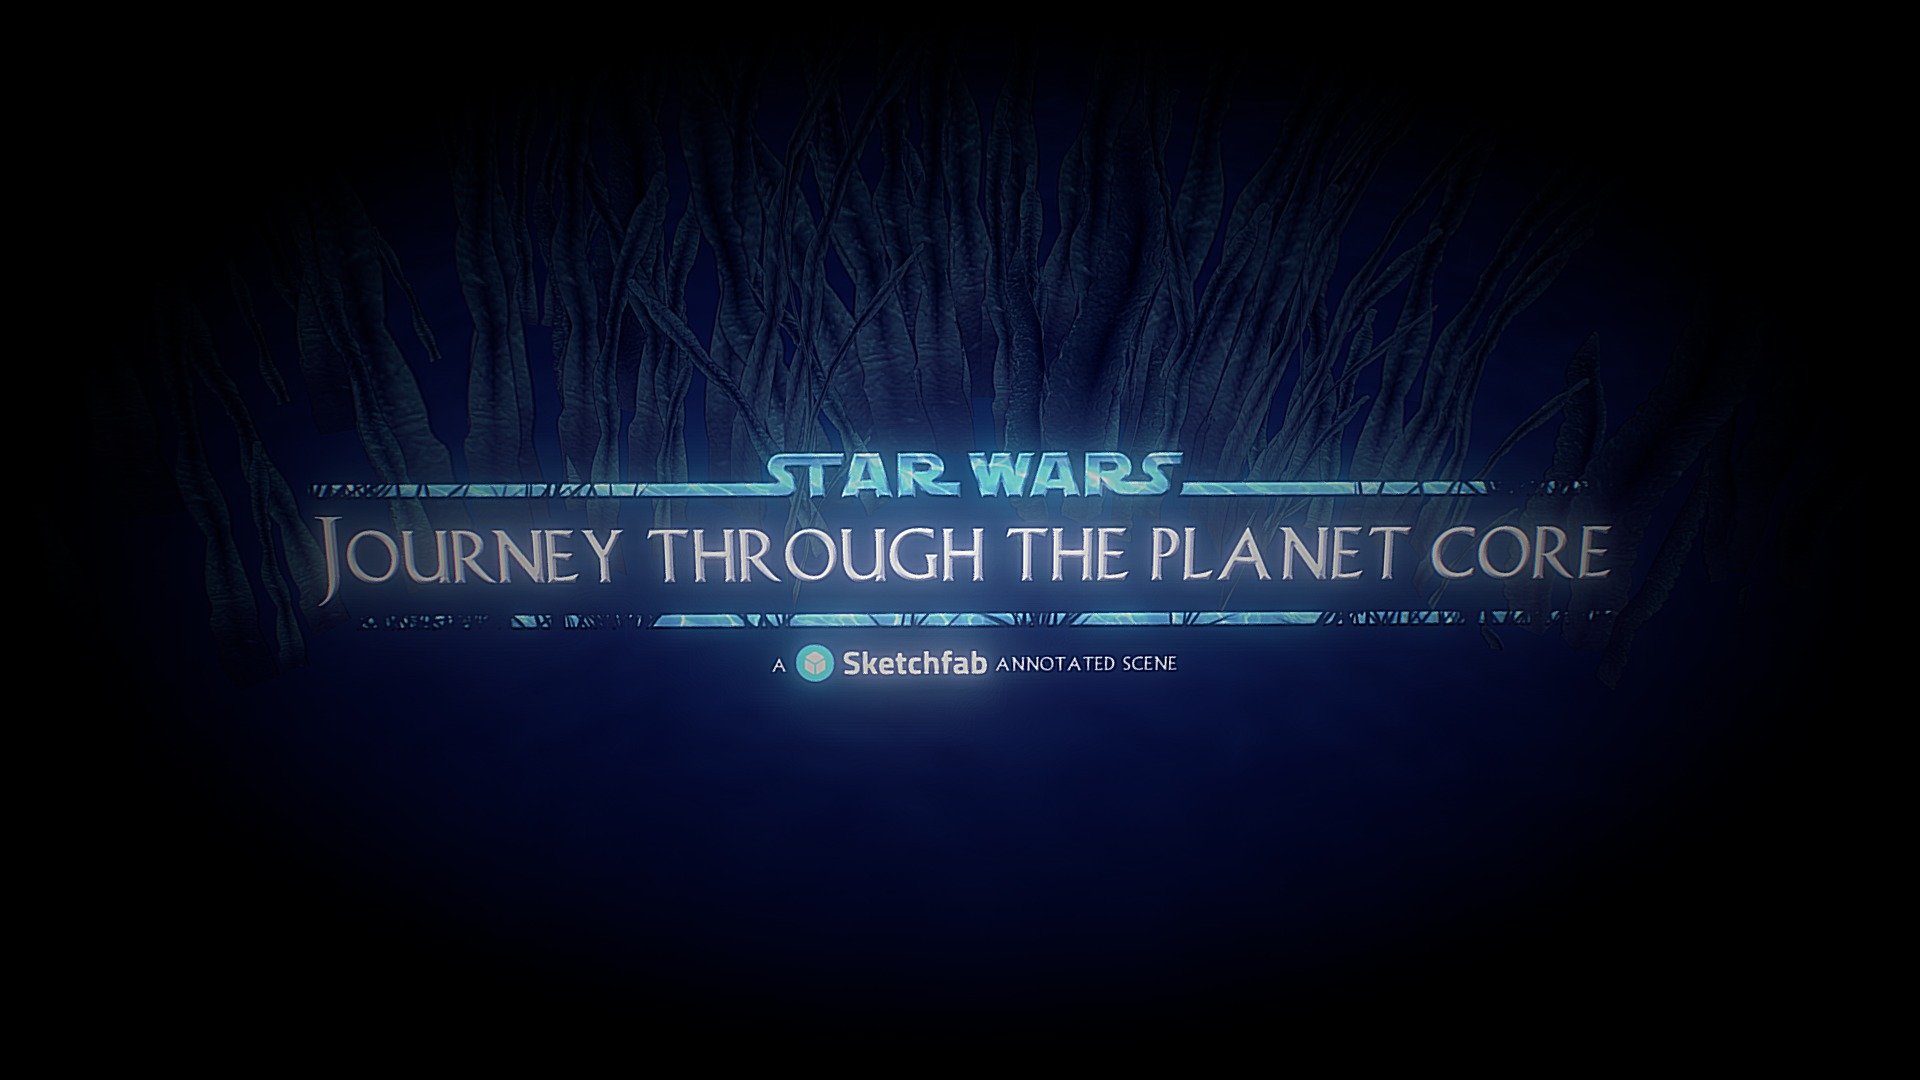 Journey to the planet core, where the death is everywhere&hellip;

Follow two Jedi and their unexpected friend while they travel on board a Bongo into this dangerous place.

But be warned, there's always a bigger fish ! - Star Wars - Journey through the planet core - 3D model by romainrevert 3d model